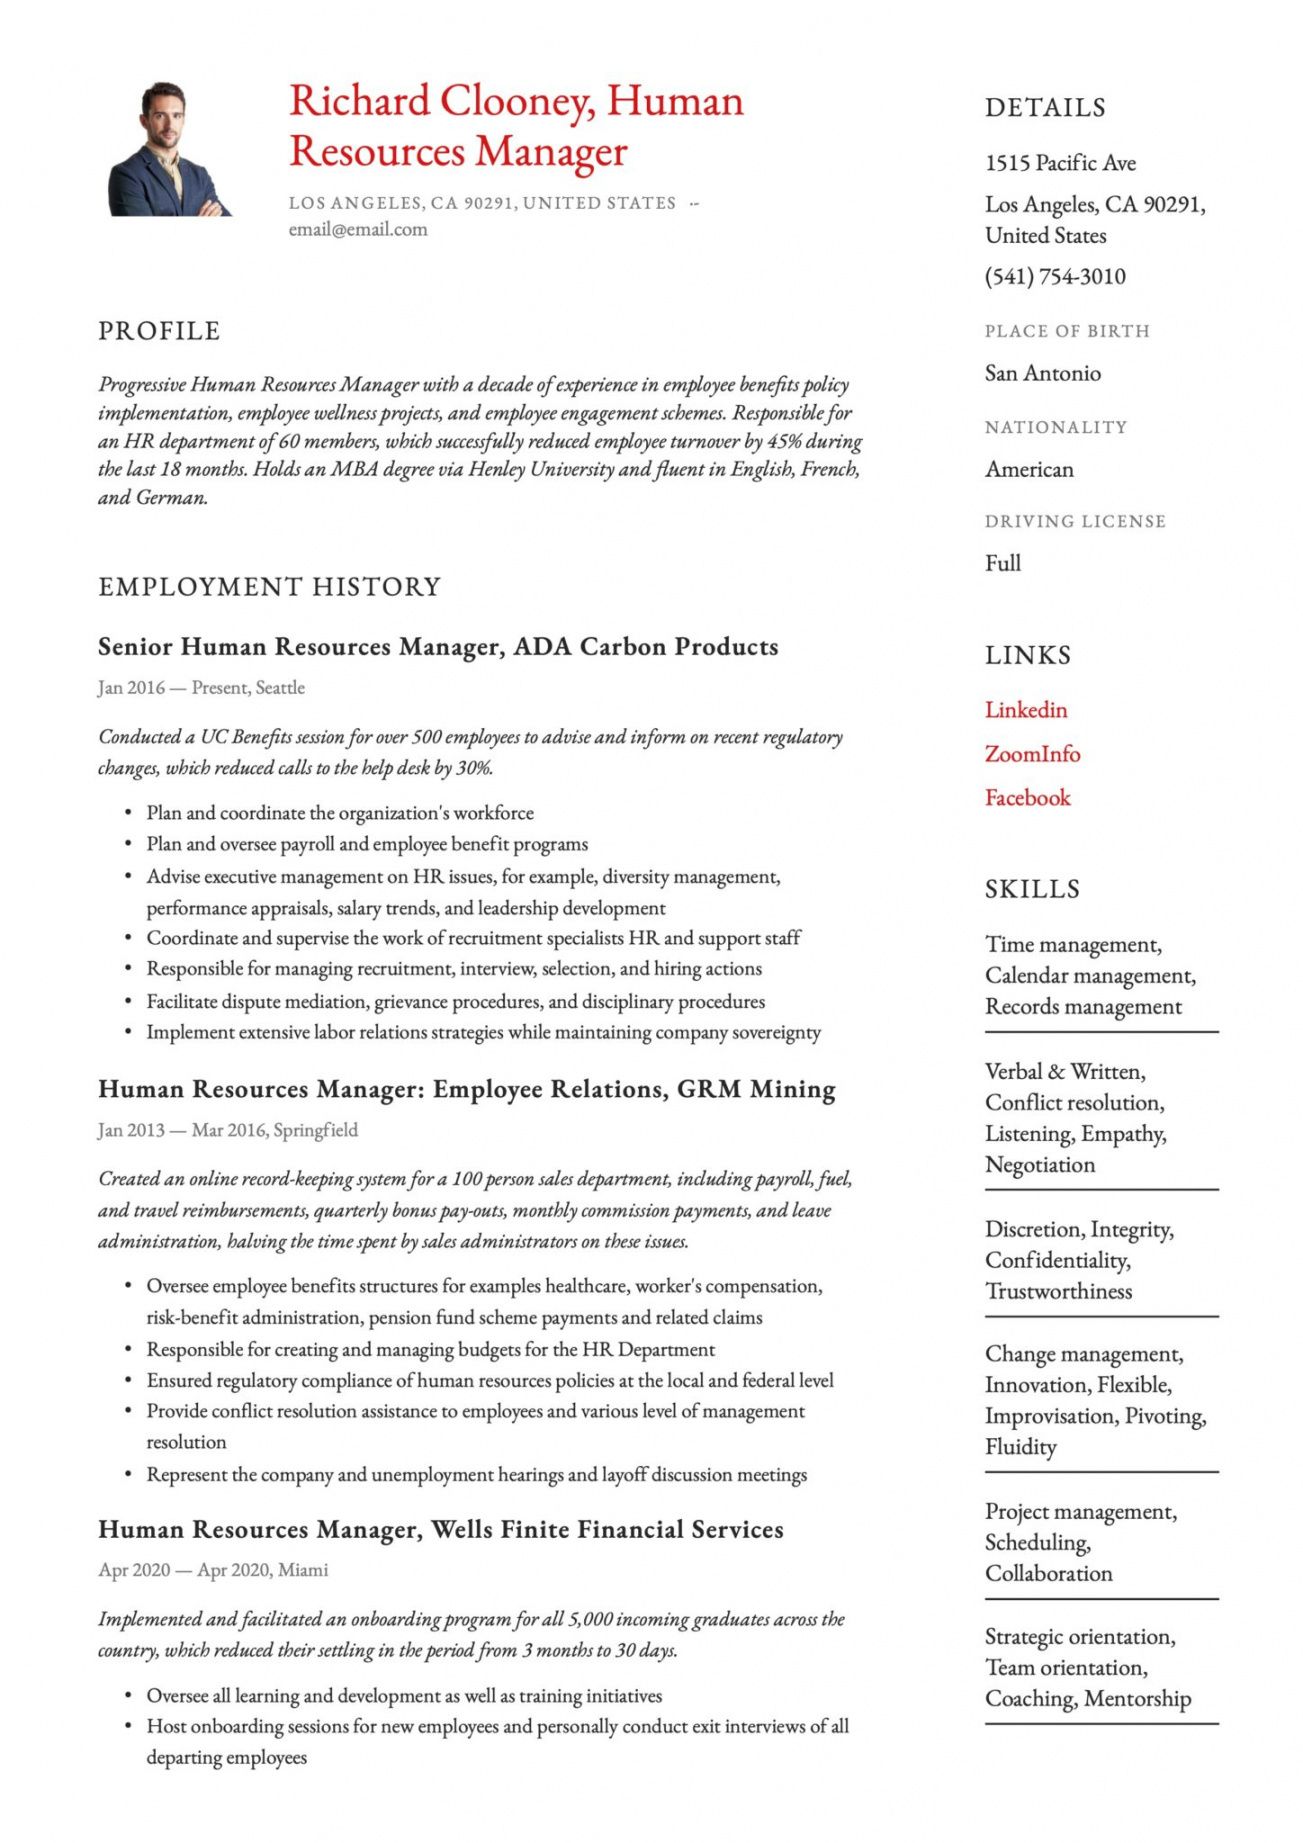 free 17 human resources manager resumes &amp; guide  2020 human resources manager job description template and sample